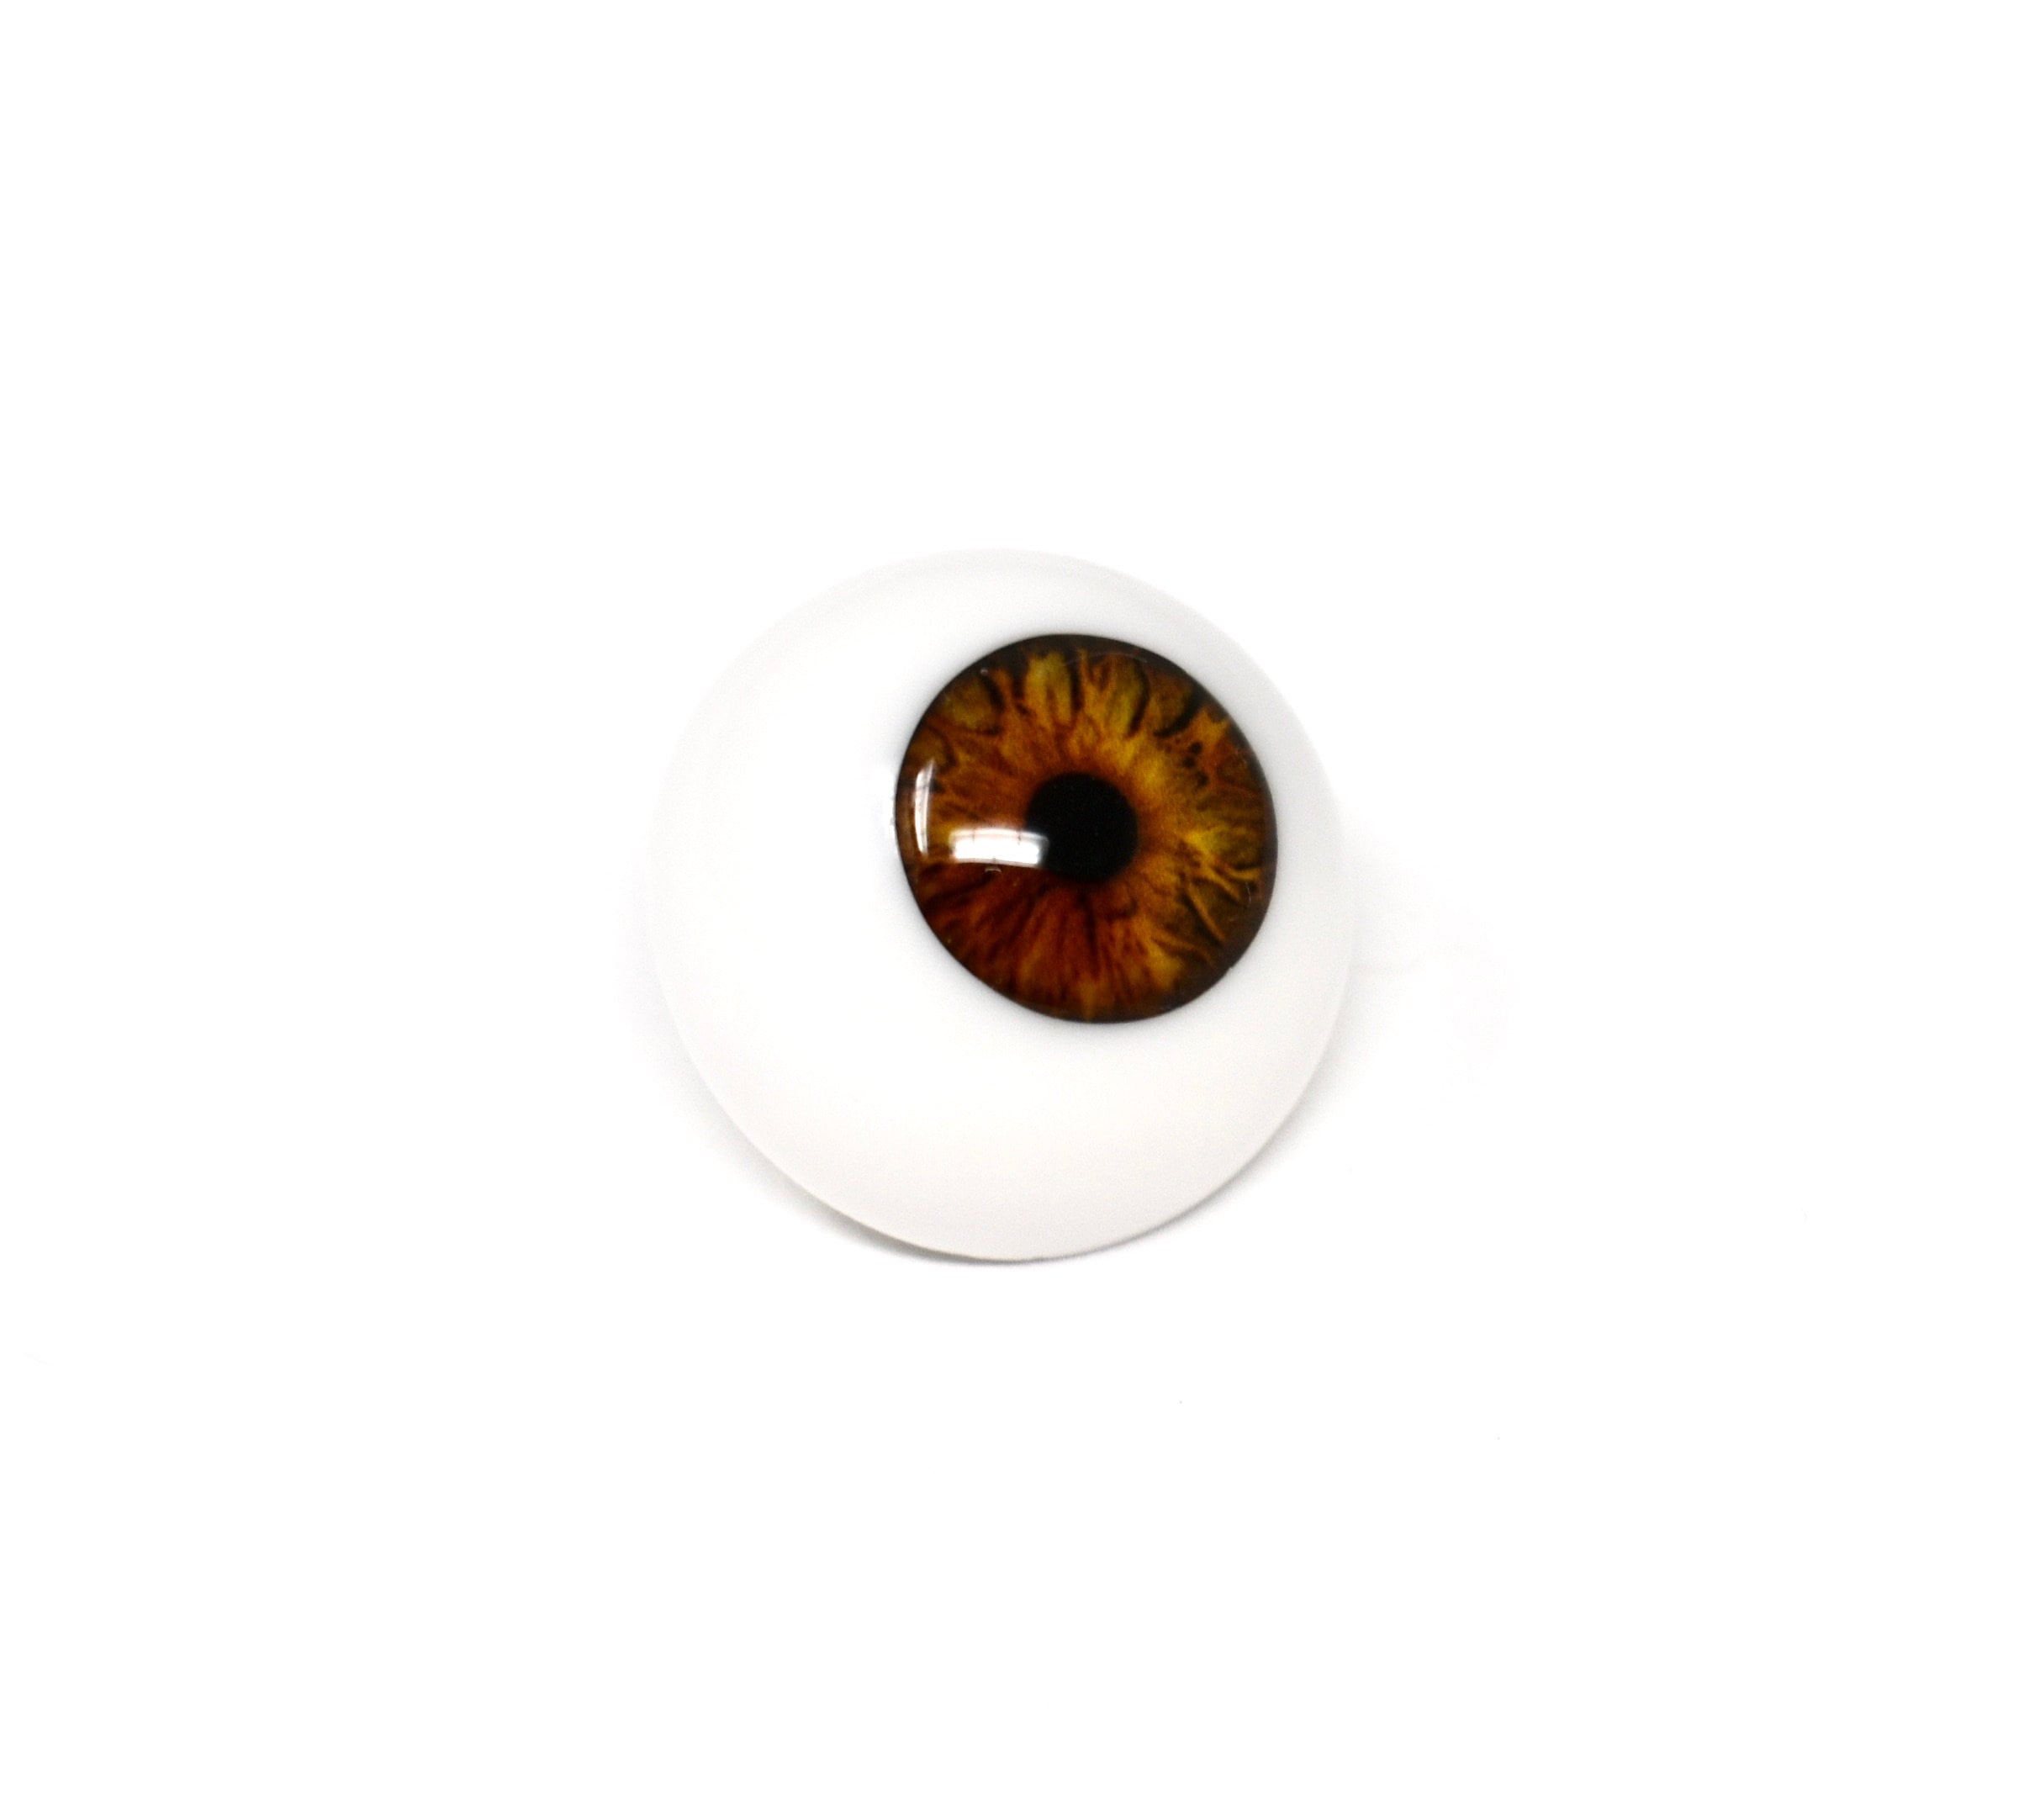 14-24 mm Mixed Safety Eyes Glass For Stuffed Animal Toy Doll Eyes